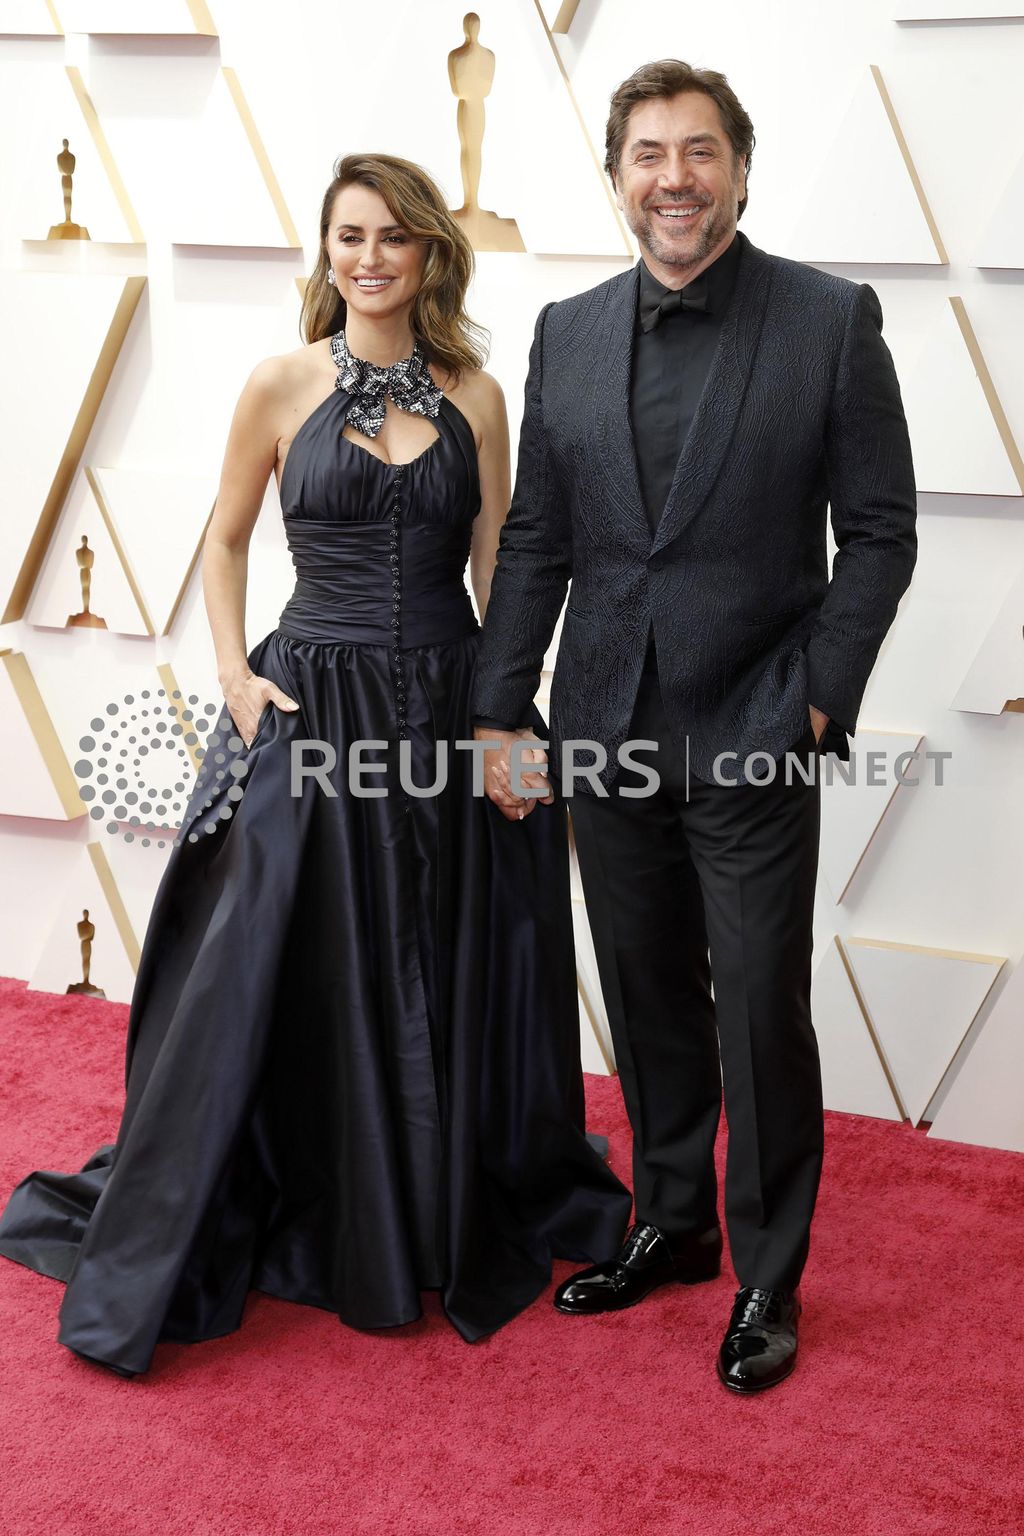 94th Academy Awards (Oscars) - Red Carpet ArrivalsFeaturing: Penelope Cruz, Javier BardemWhere: Los Angeles, California, United StatesWhen: 28 Mar 2022Credit: Abby Grant/Cover Images